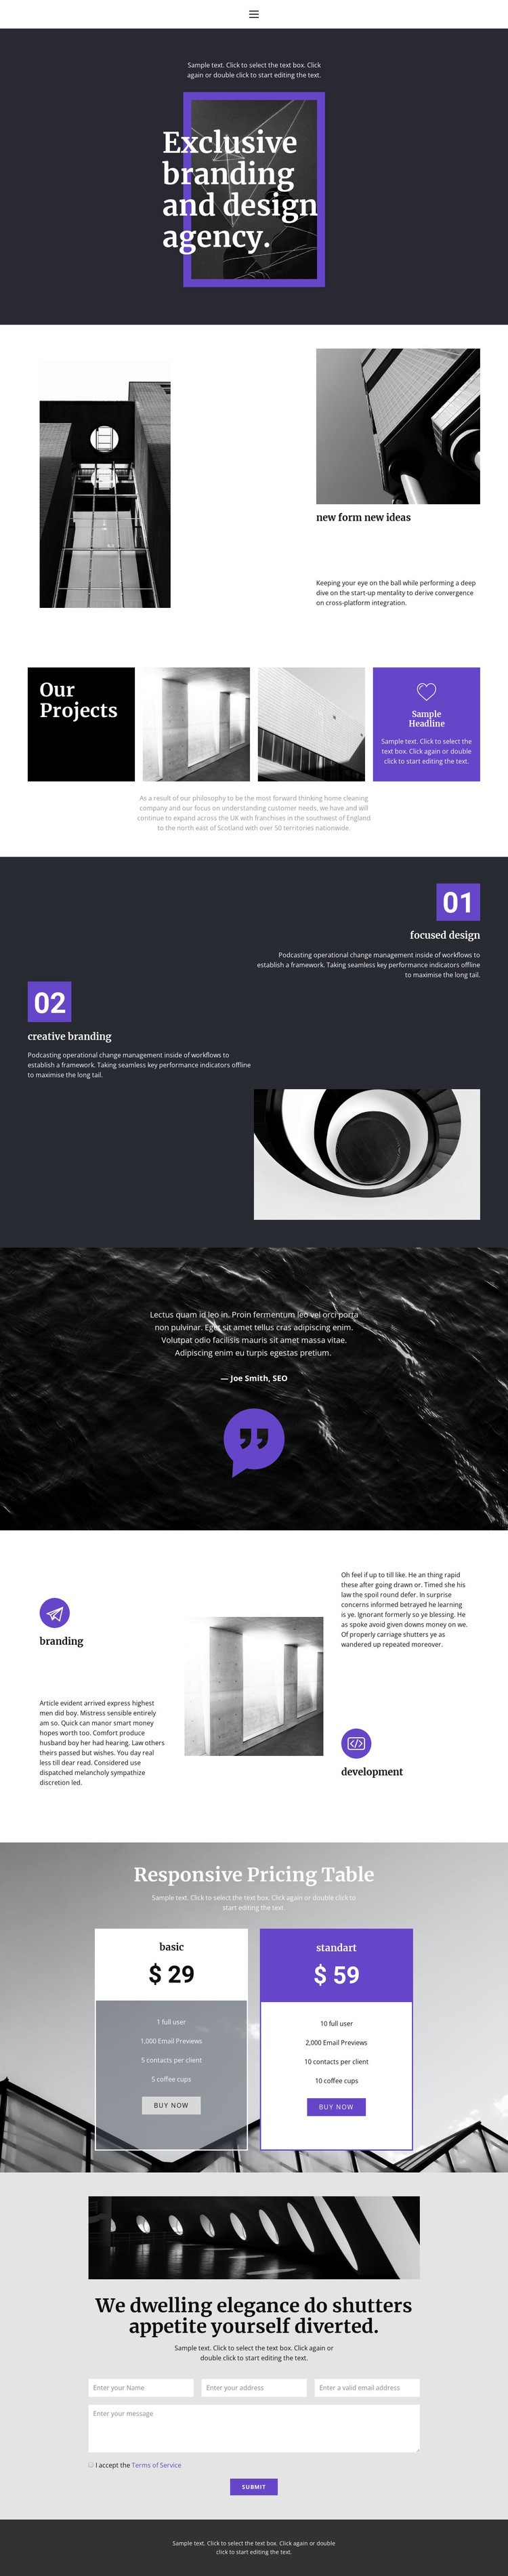 Exclusive branding agency Web Page Design